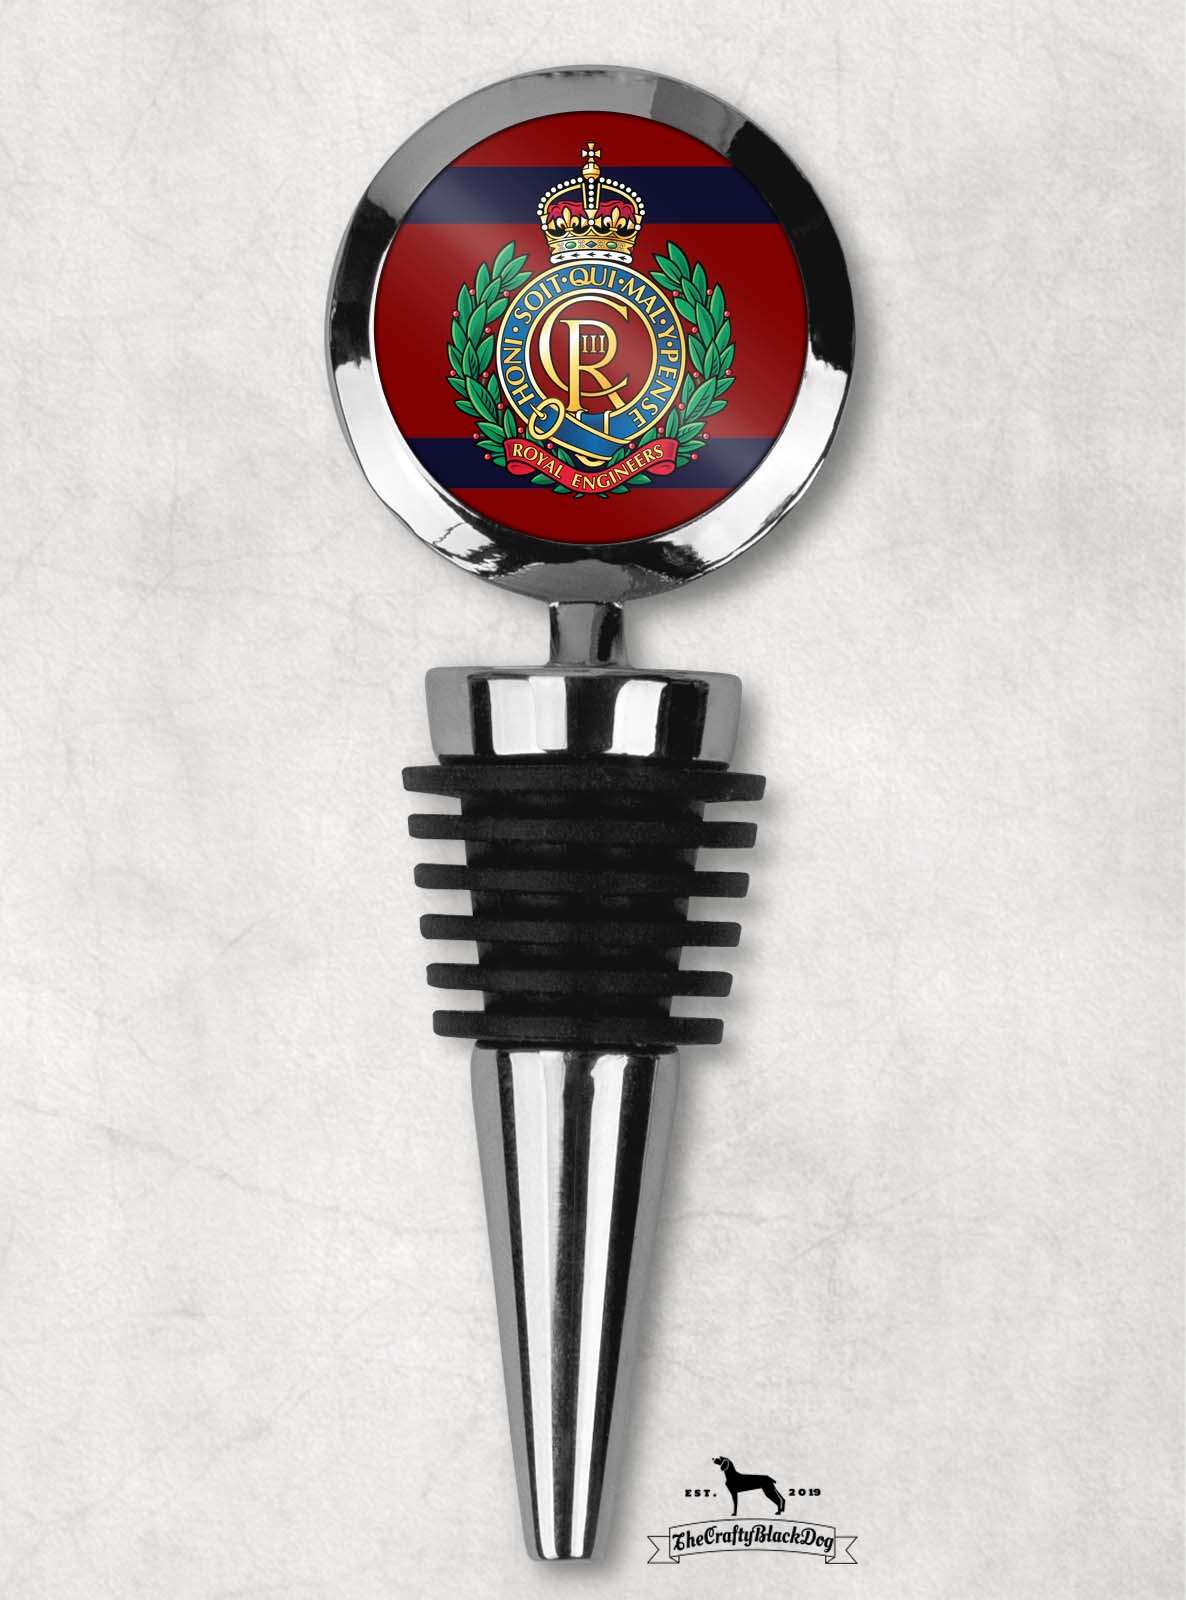 Royal Engineers - Wine Bottle Stopper (New King's Crown)